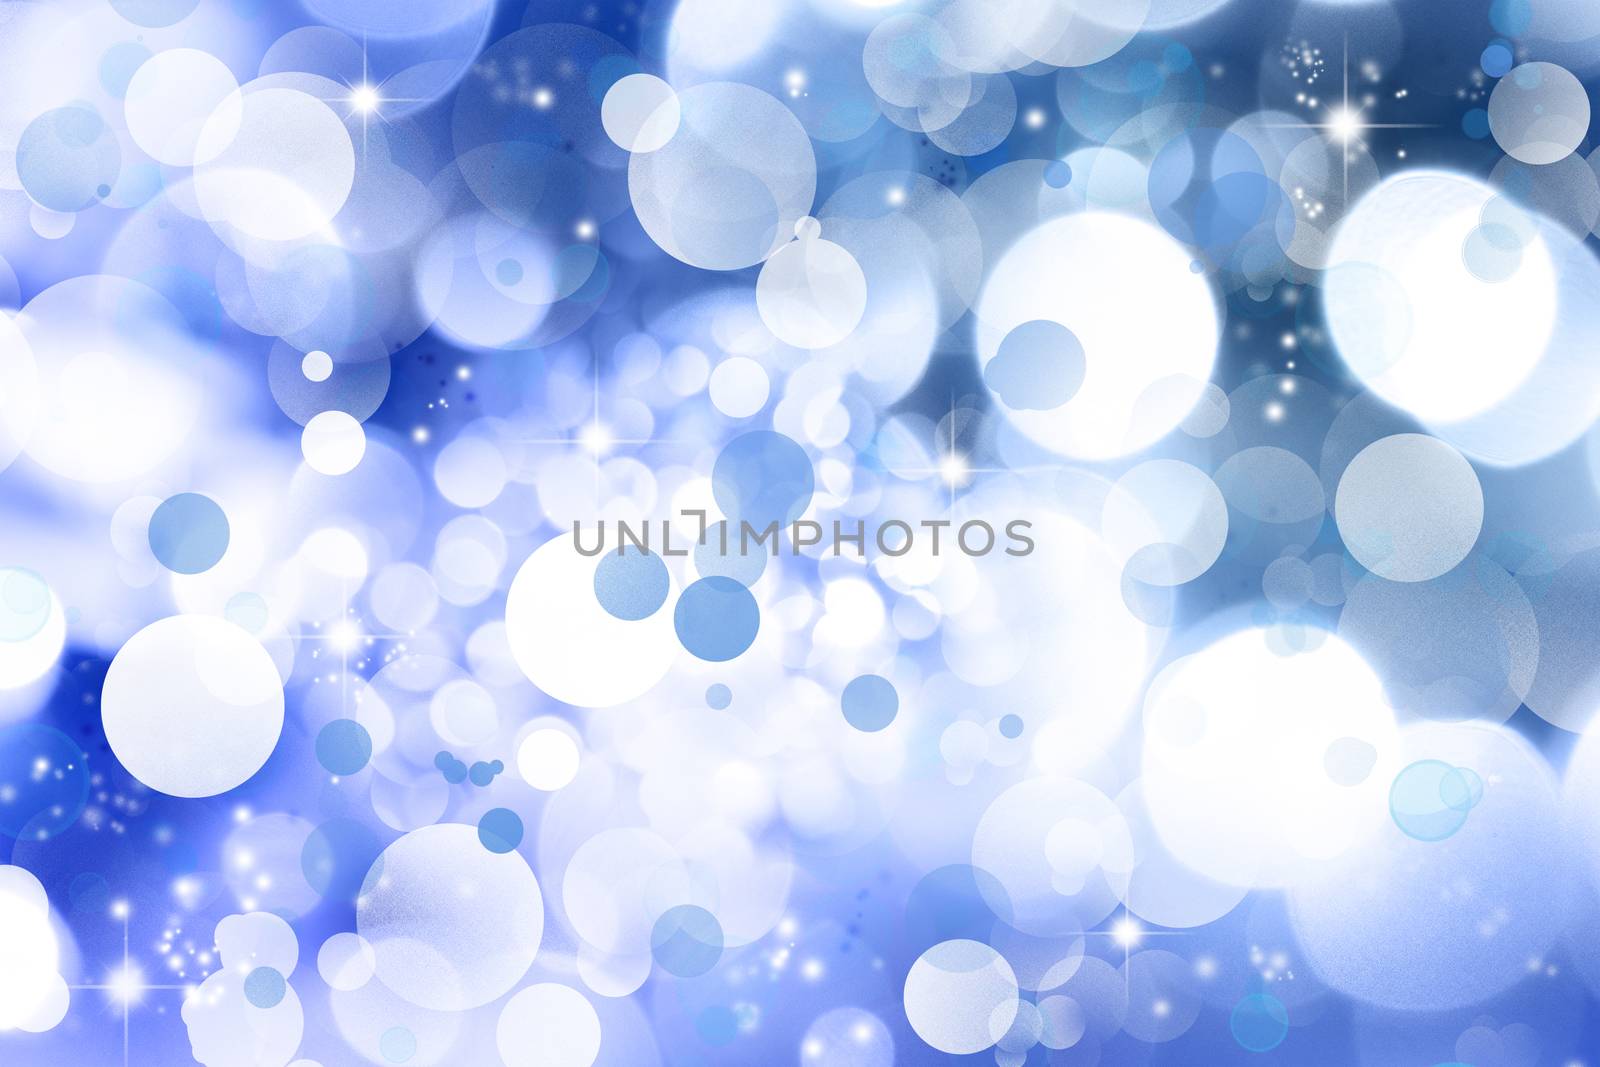 Bright circles of light abstract background